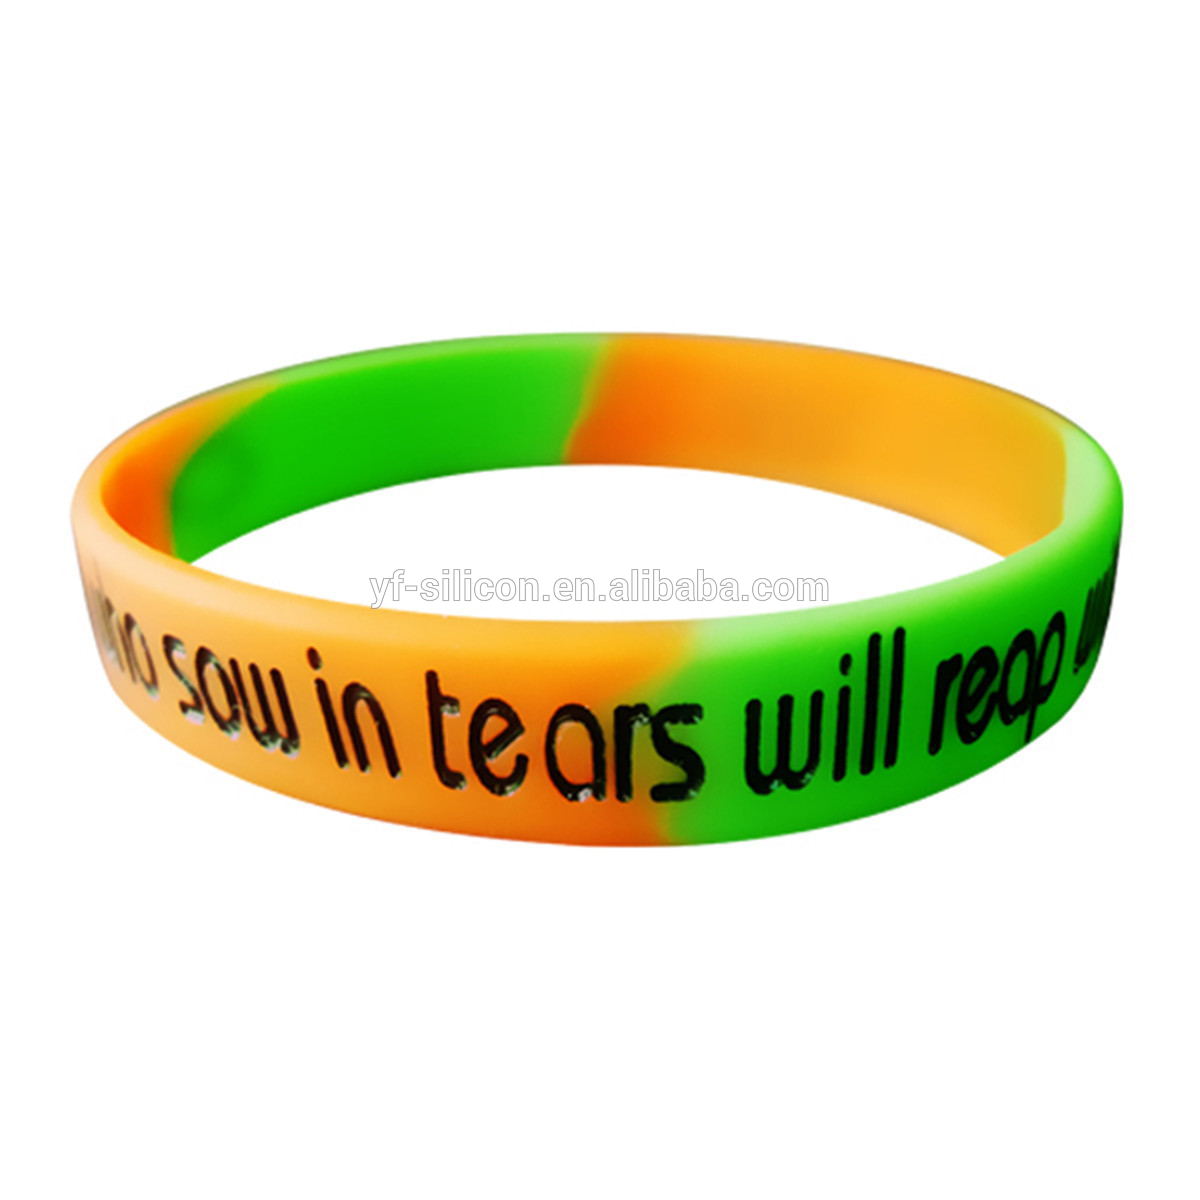  High Quality high quality silicone wristbands for kids 11